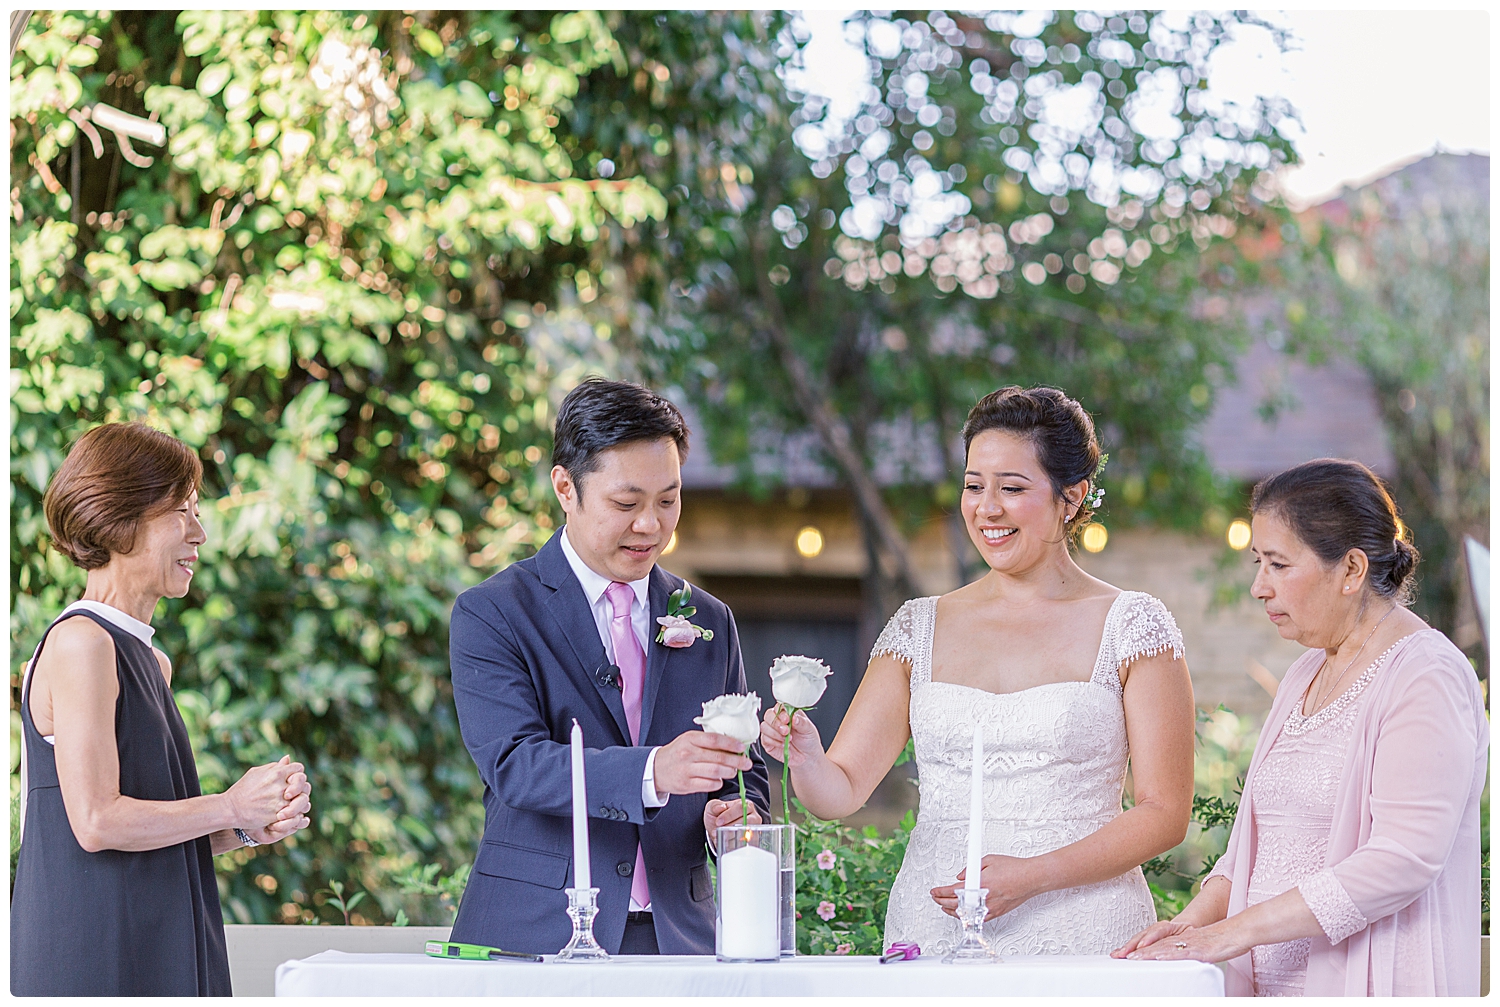 Bride and groom adding flowers to the family unity vase